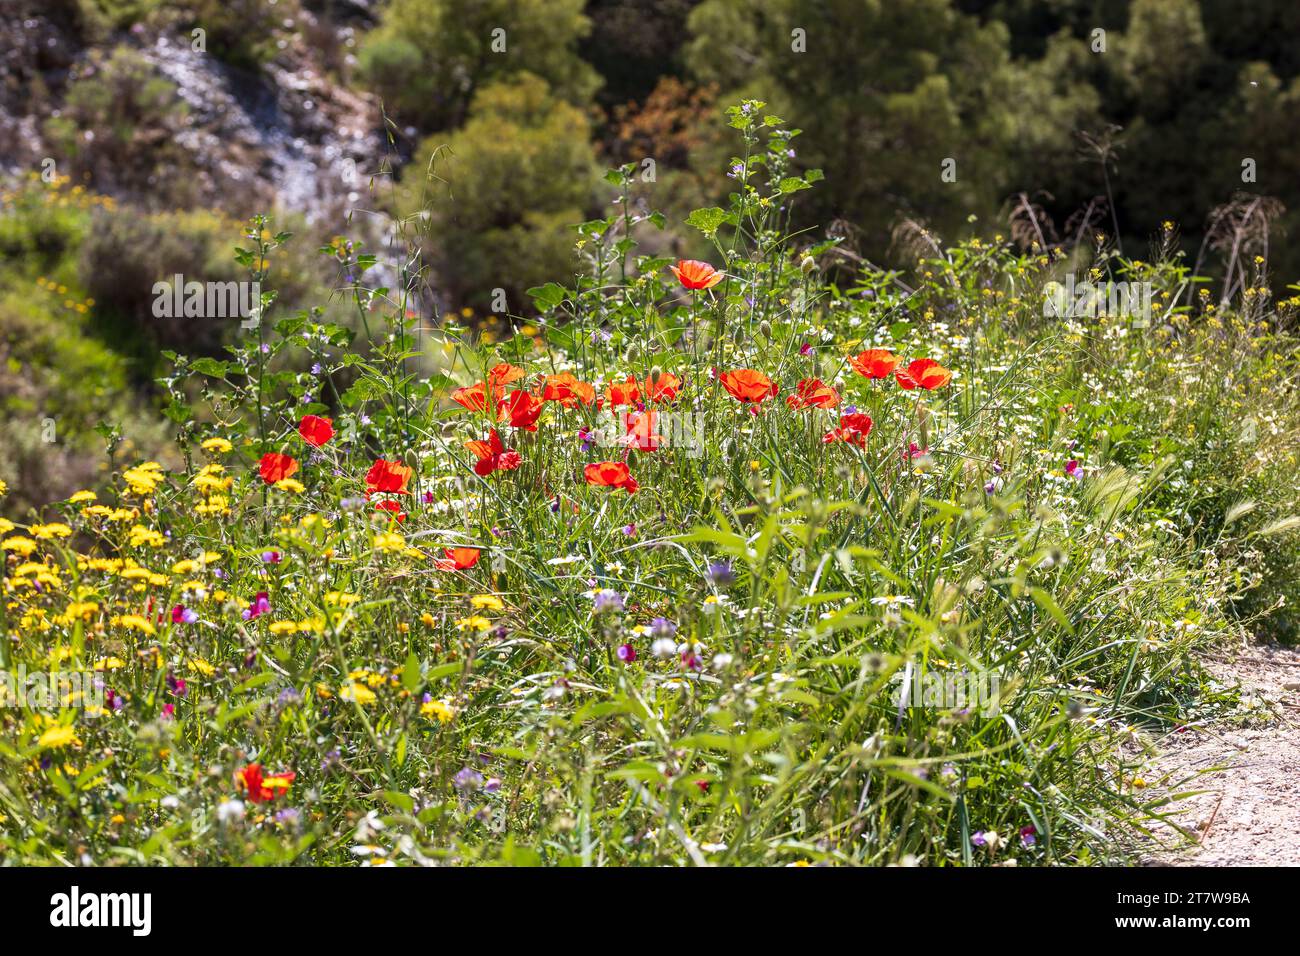 Wild Flowers Growing in the Spanish Countryside Stock Photo